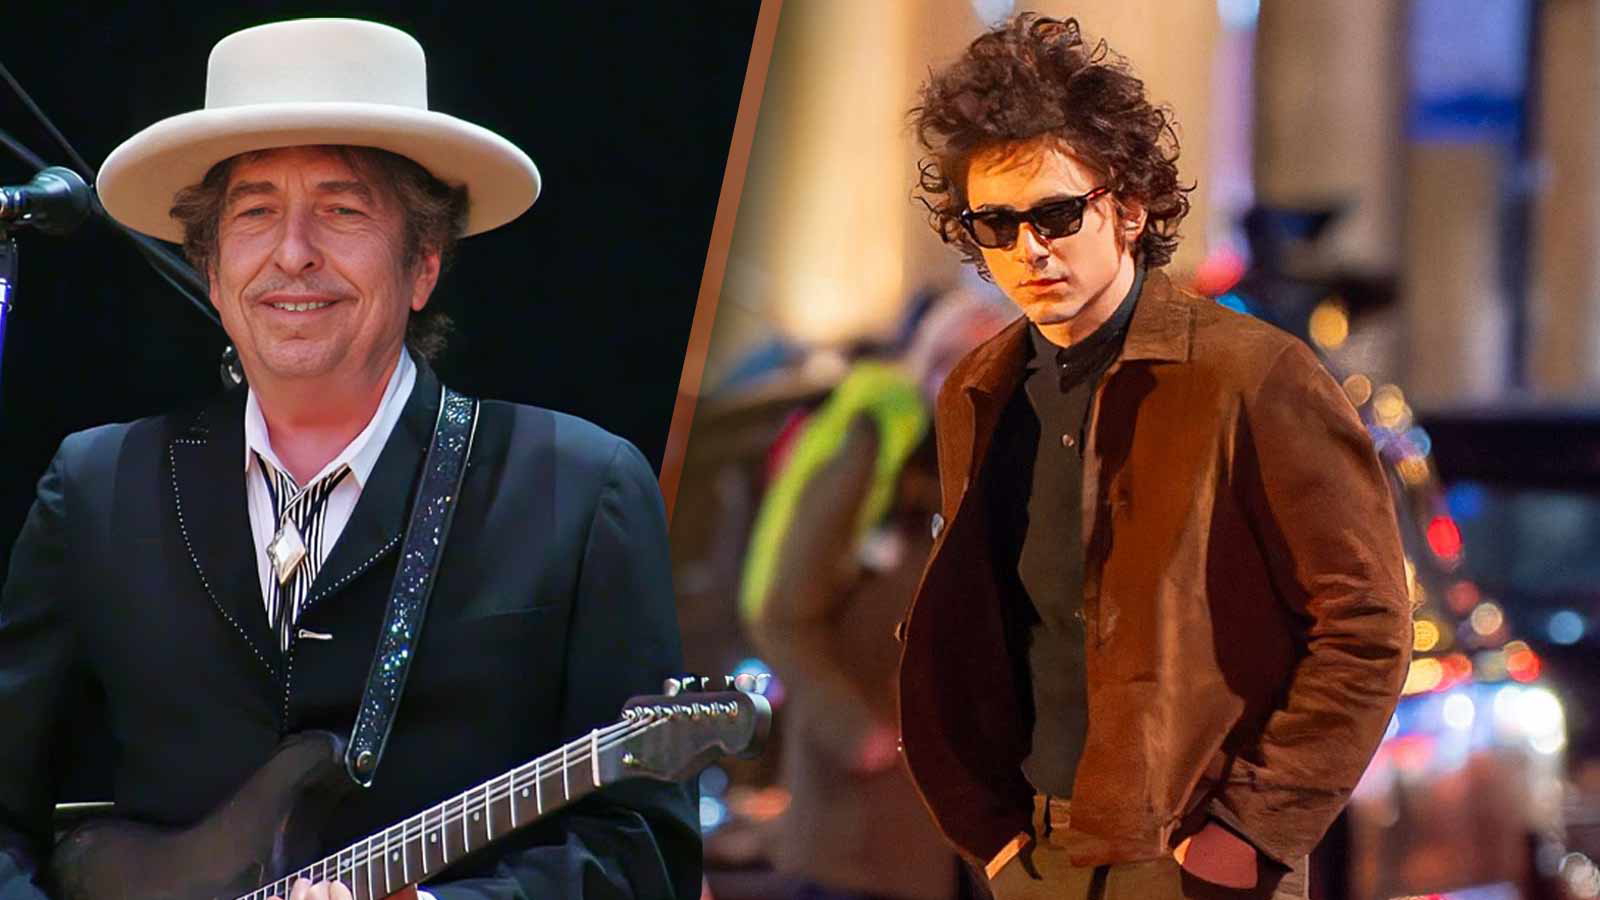 “The way he blinks while singing is so Bob”: Timothée Chalamet Gets the Approval of Fans After the First Trailer For Bob Dylan’s Biopic A Complete Unknown